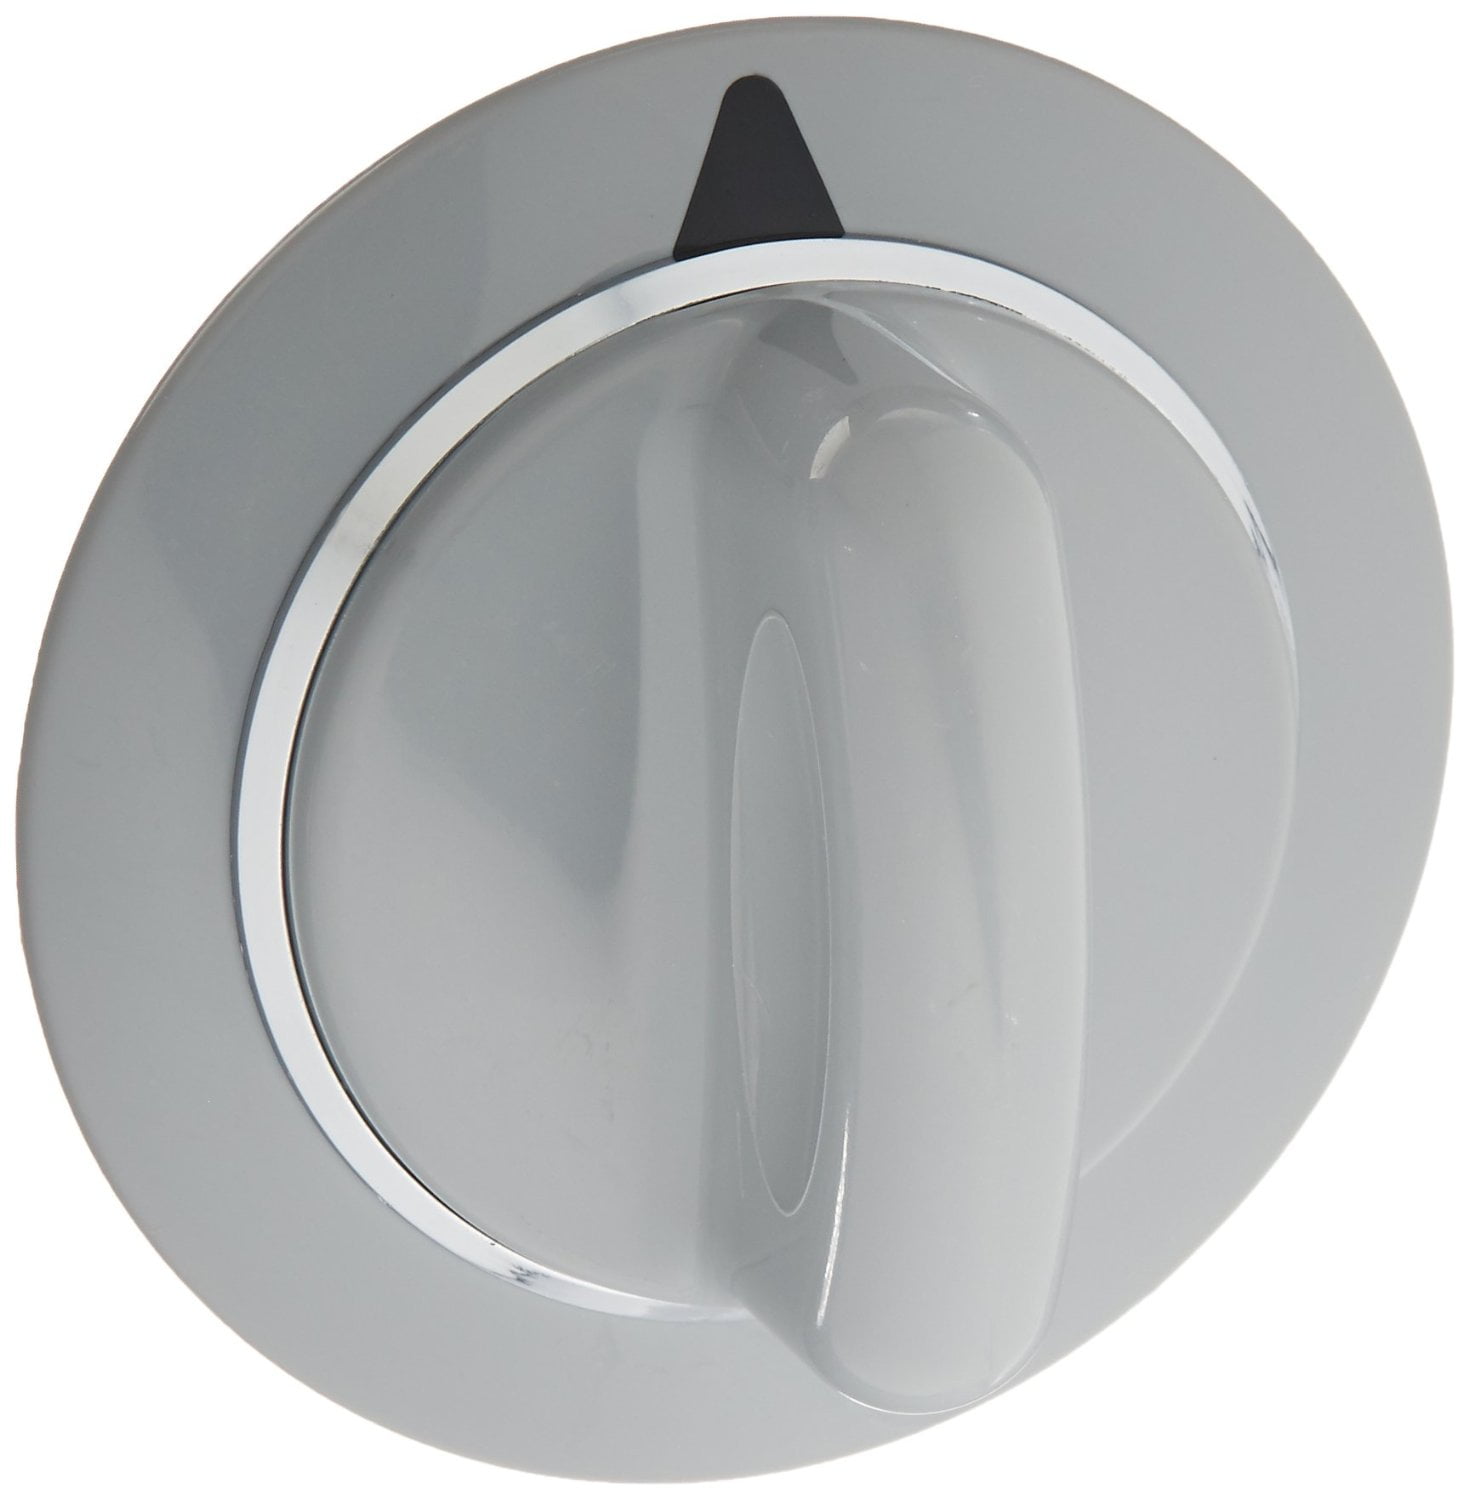 WE01X20374 Hotpoint White Dryer Knob replaces GE 